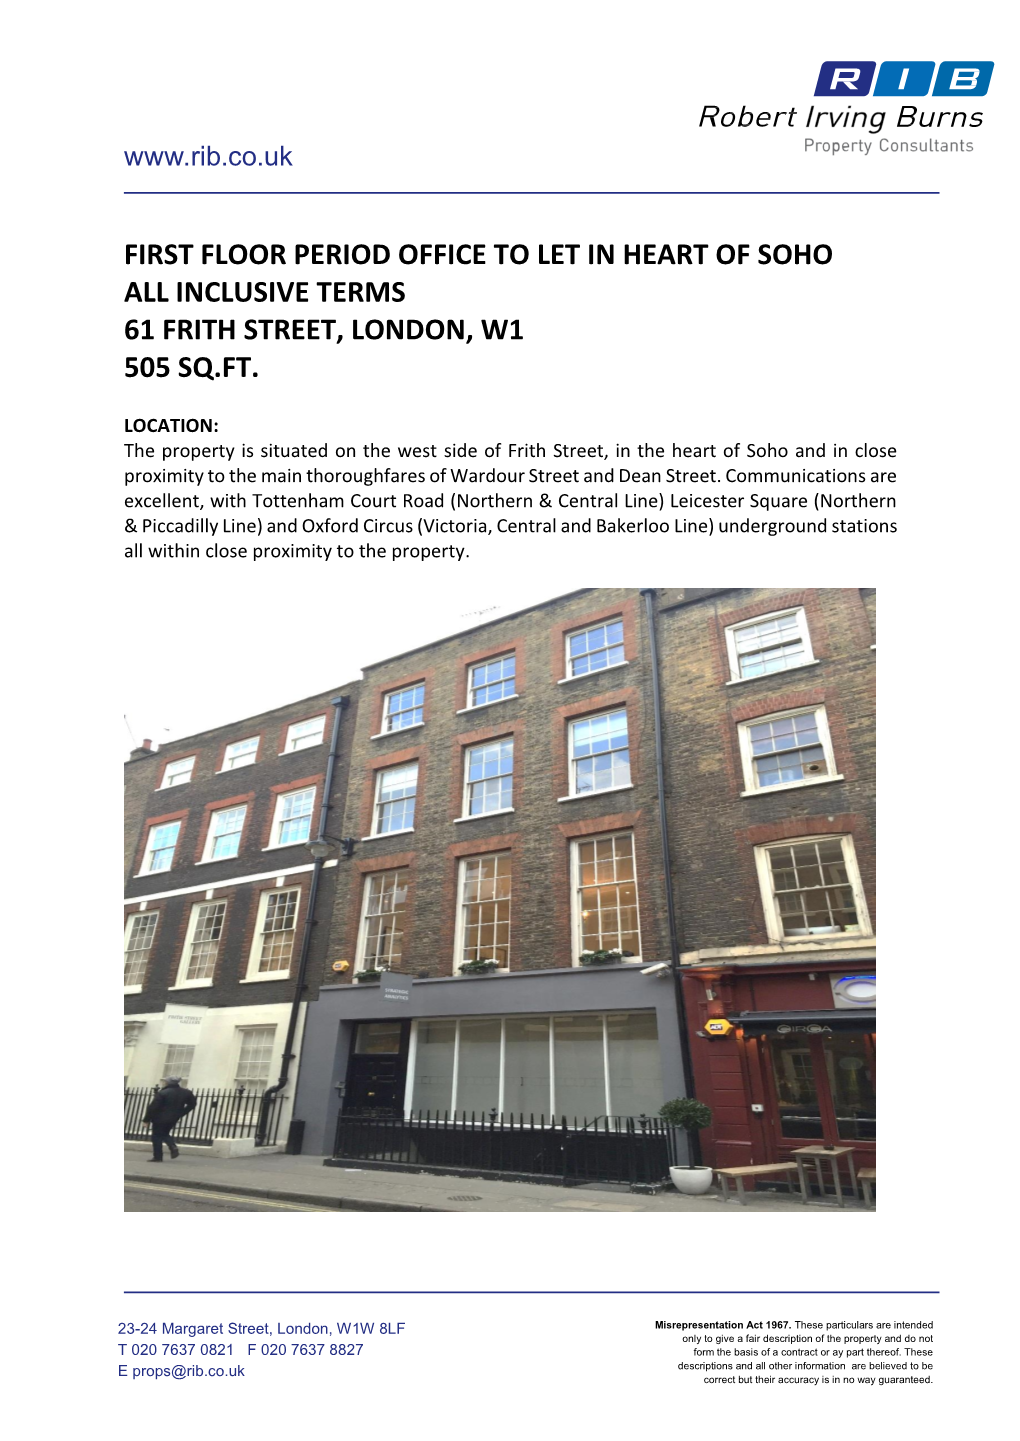 First Floor Period Office to Let in Heart of Soho All Inclusive Terms 61 Frith Street, London, W1 505 Sq.Ft